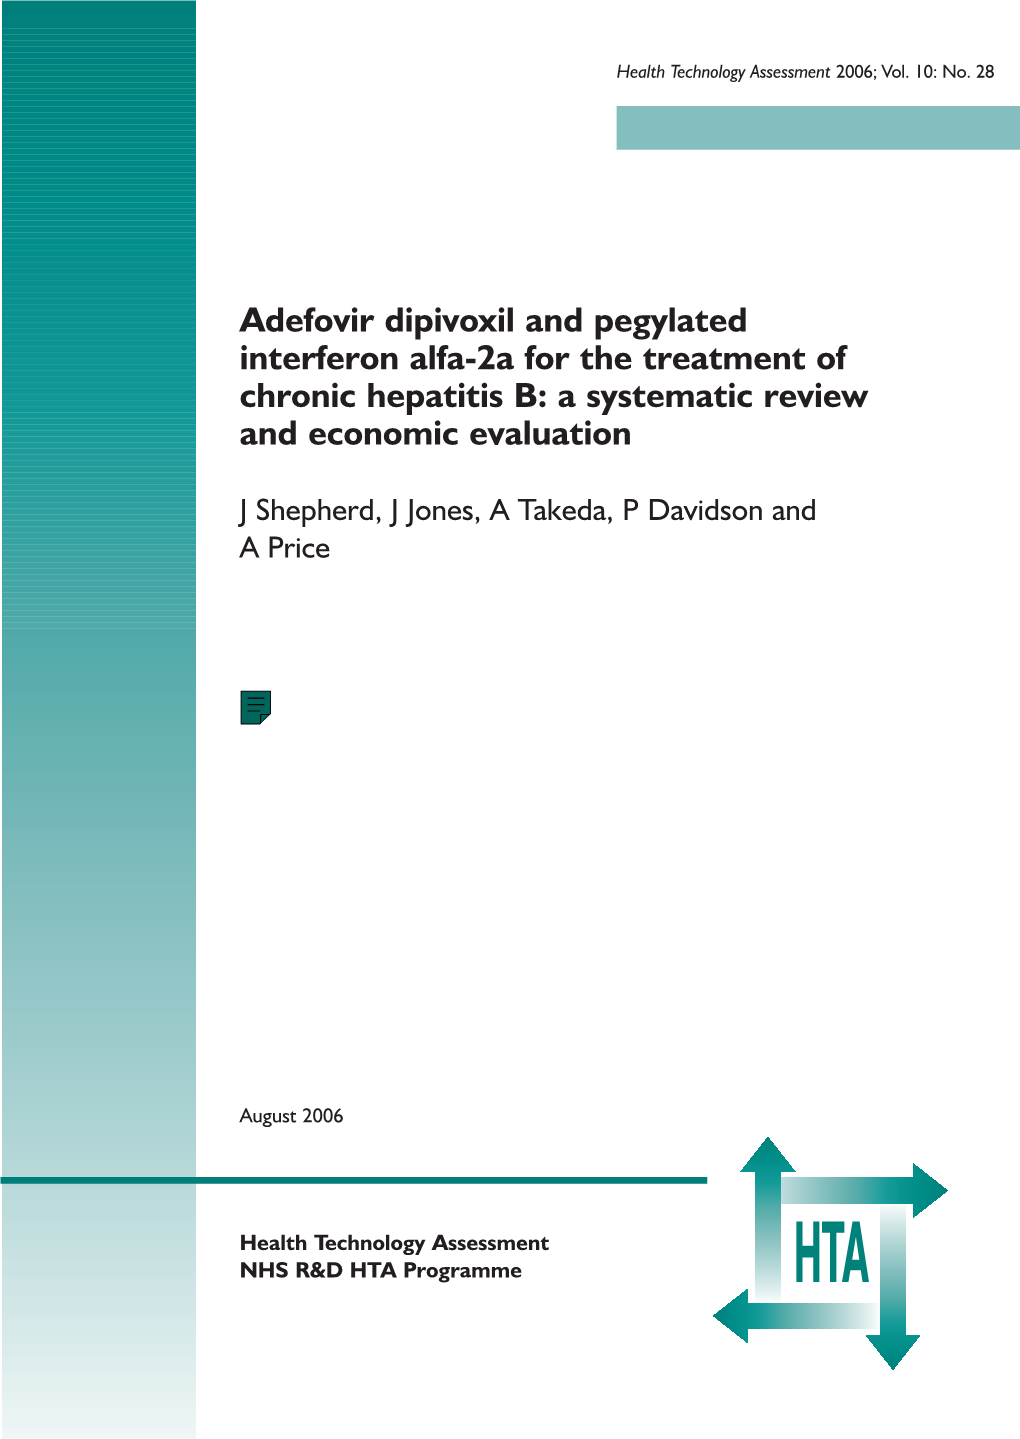 Adefovir Dipivoxil and Pegylated Interferon Alfa-2A for the Treatment of Chronic Hepatitis B ISSN 1366-5278 Feedback Your Views About This Report